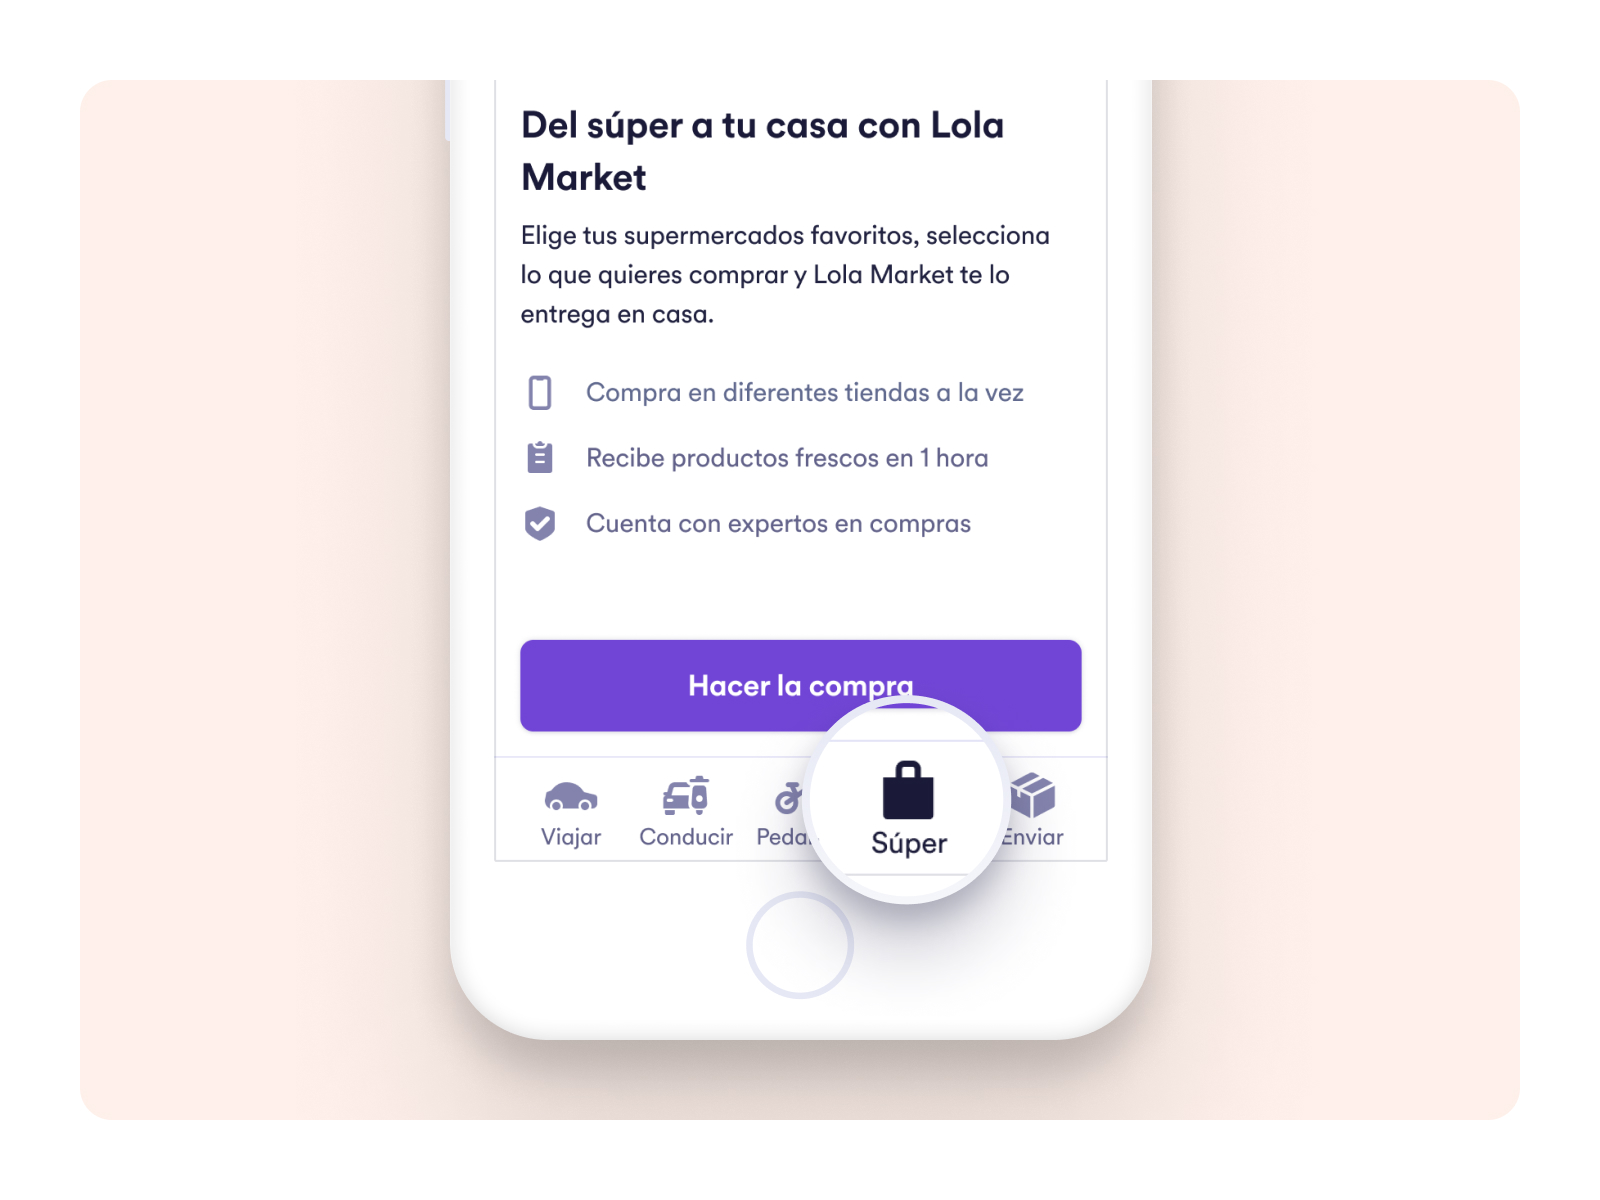 The new ‘Super’ option in Cabify’s app in Spain (Image credits: Cabify)